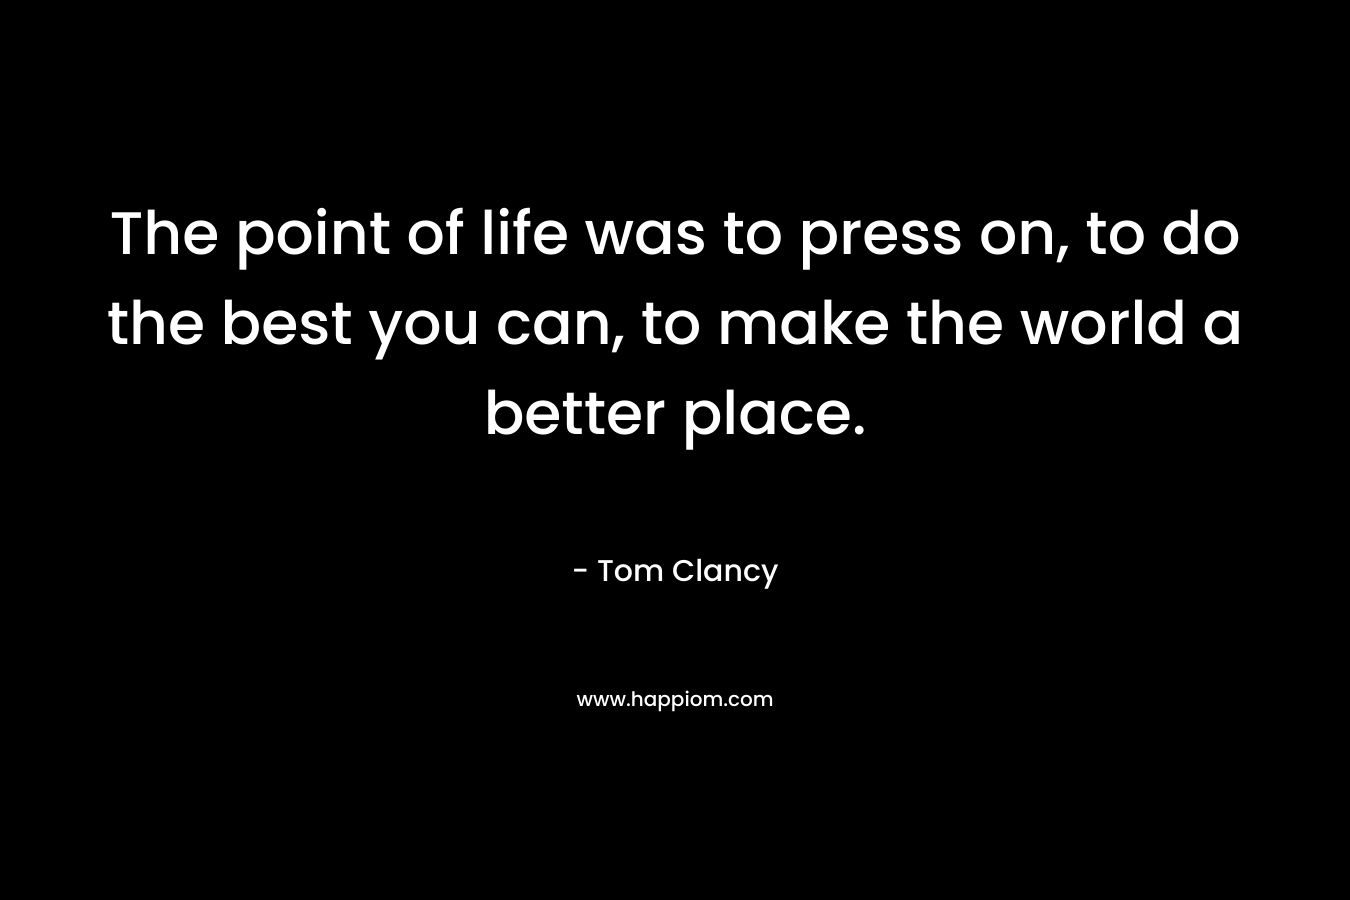 The point of life was to press on, to do the best you can, to make the world a better place. – Tom Clancy